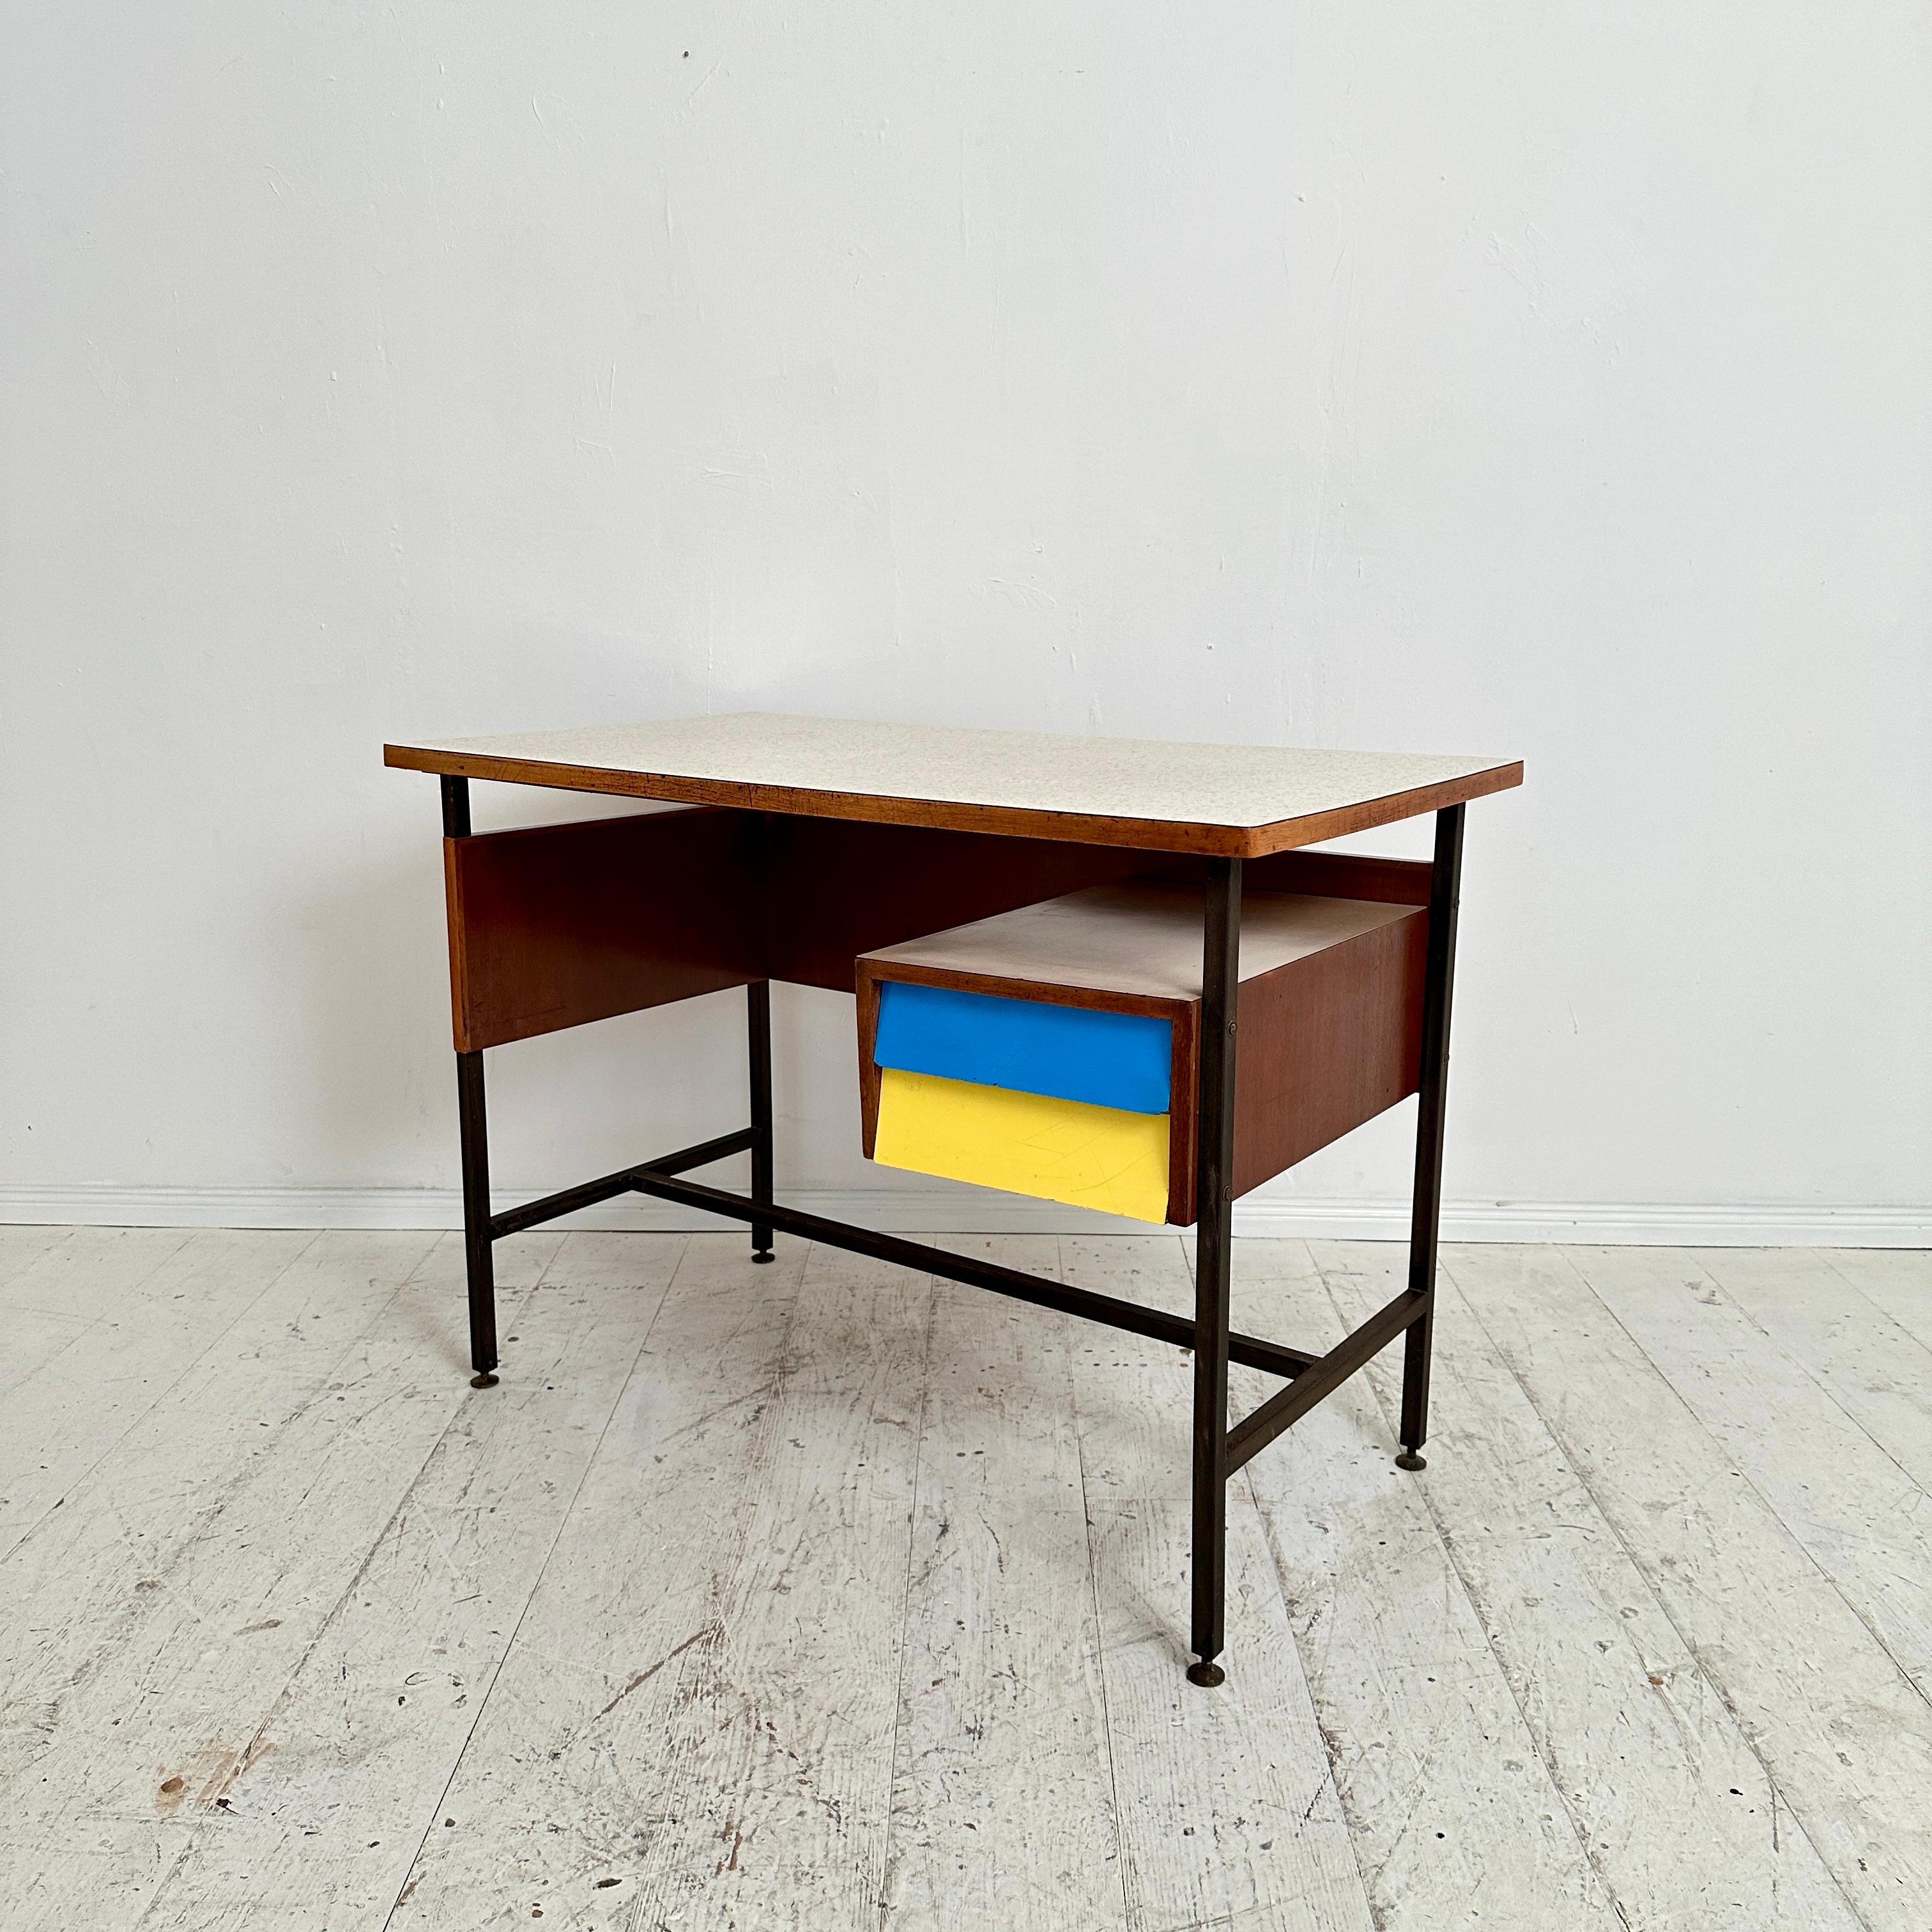 Small Mid Century Italian Desk in Metal, Walnut and Formica, around 1950 For Sale 2